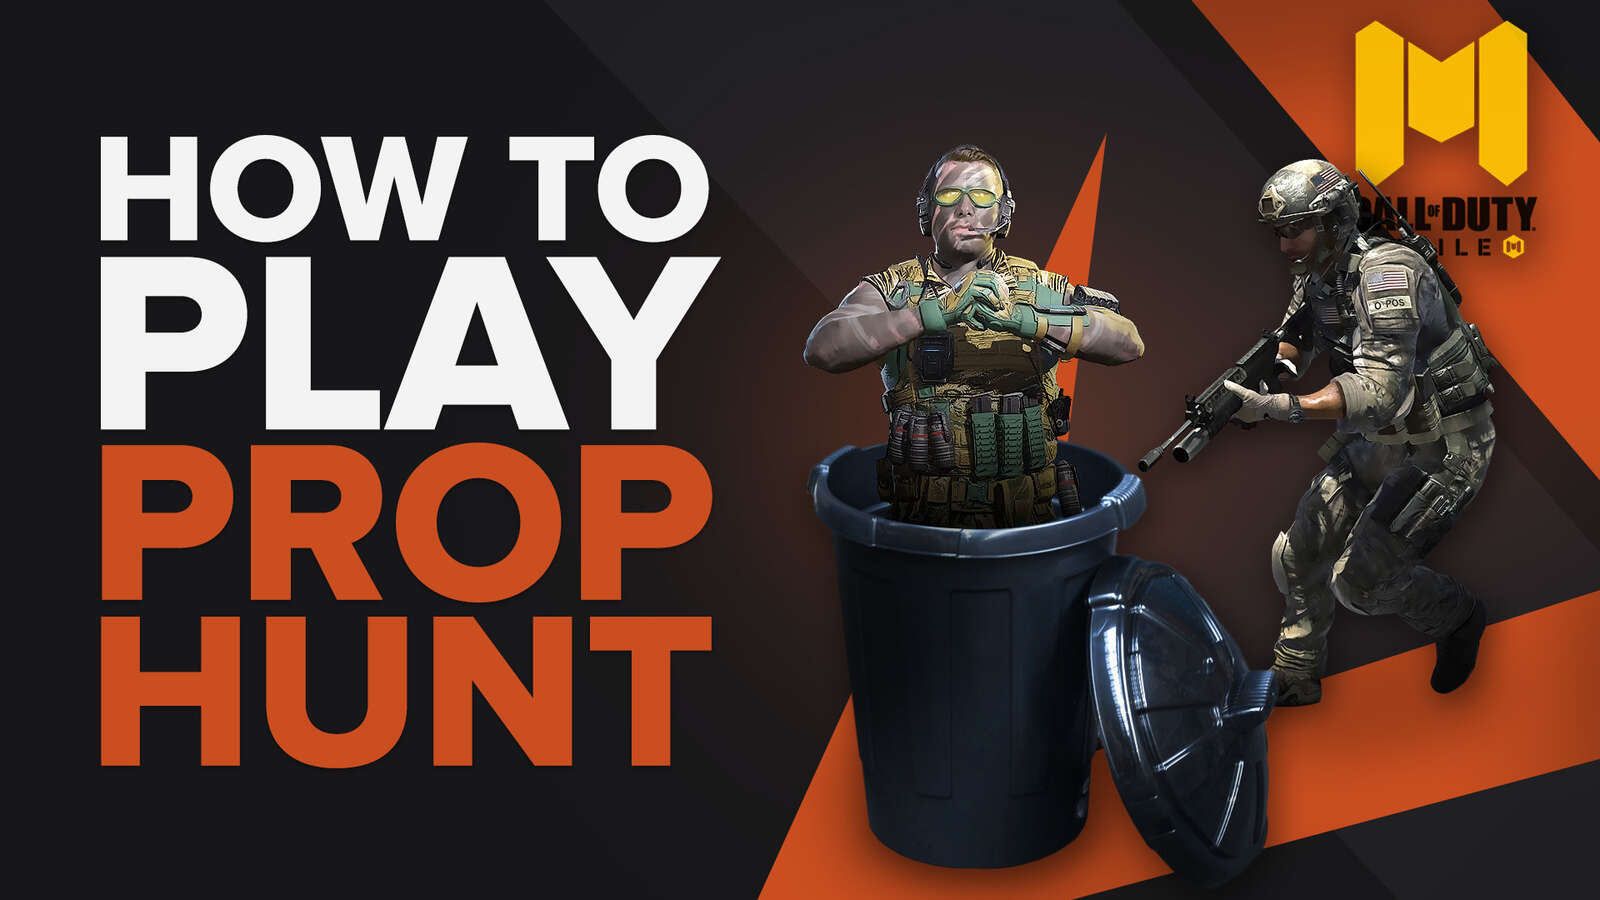 How to Play Prop Hunt in CoD Mobile [Step-by-Step]